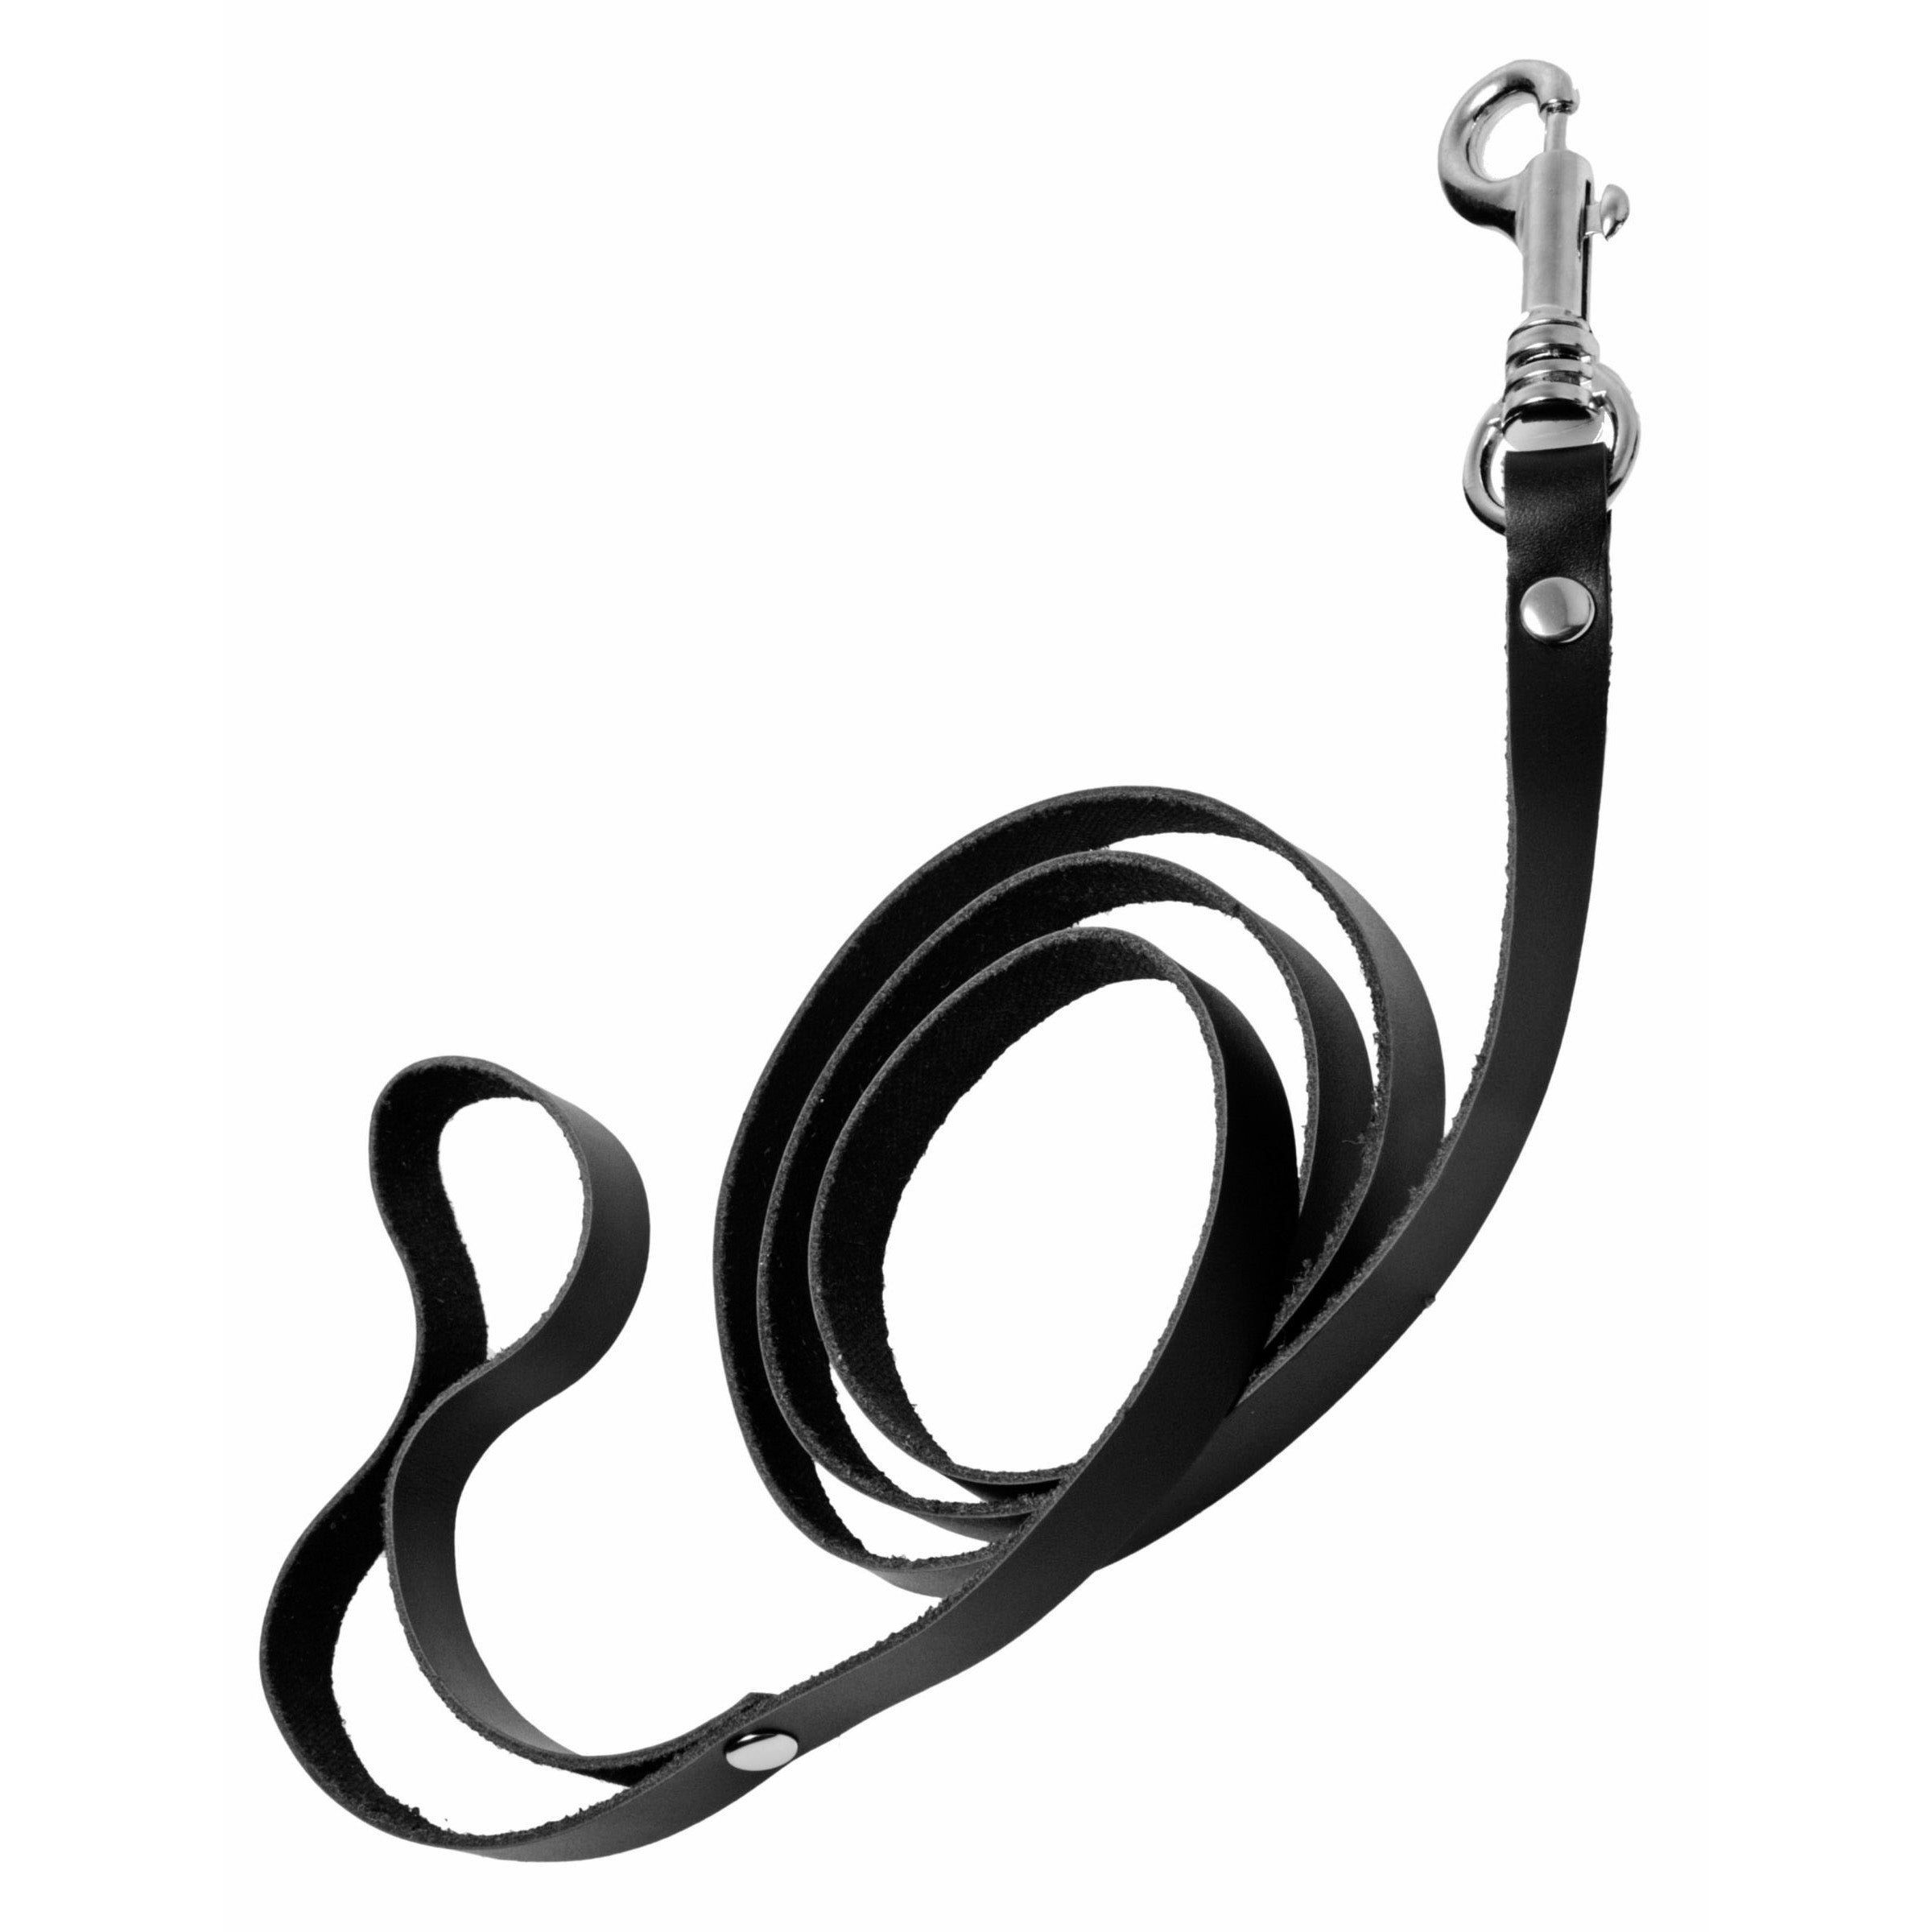 By the Balls Scrotum Stretching Kit with Leash